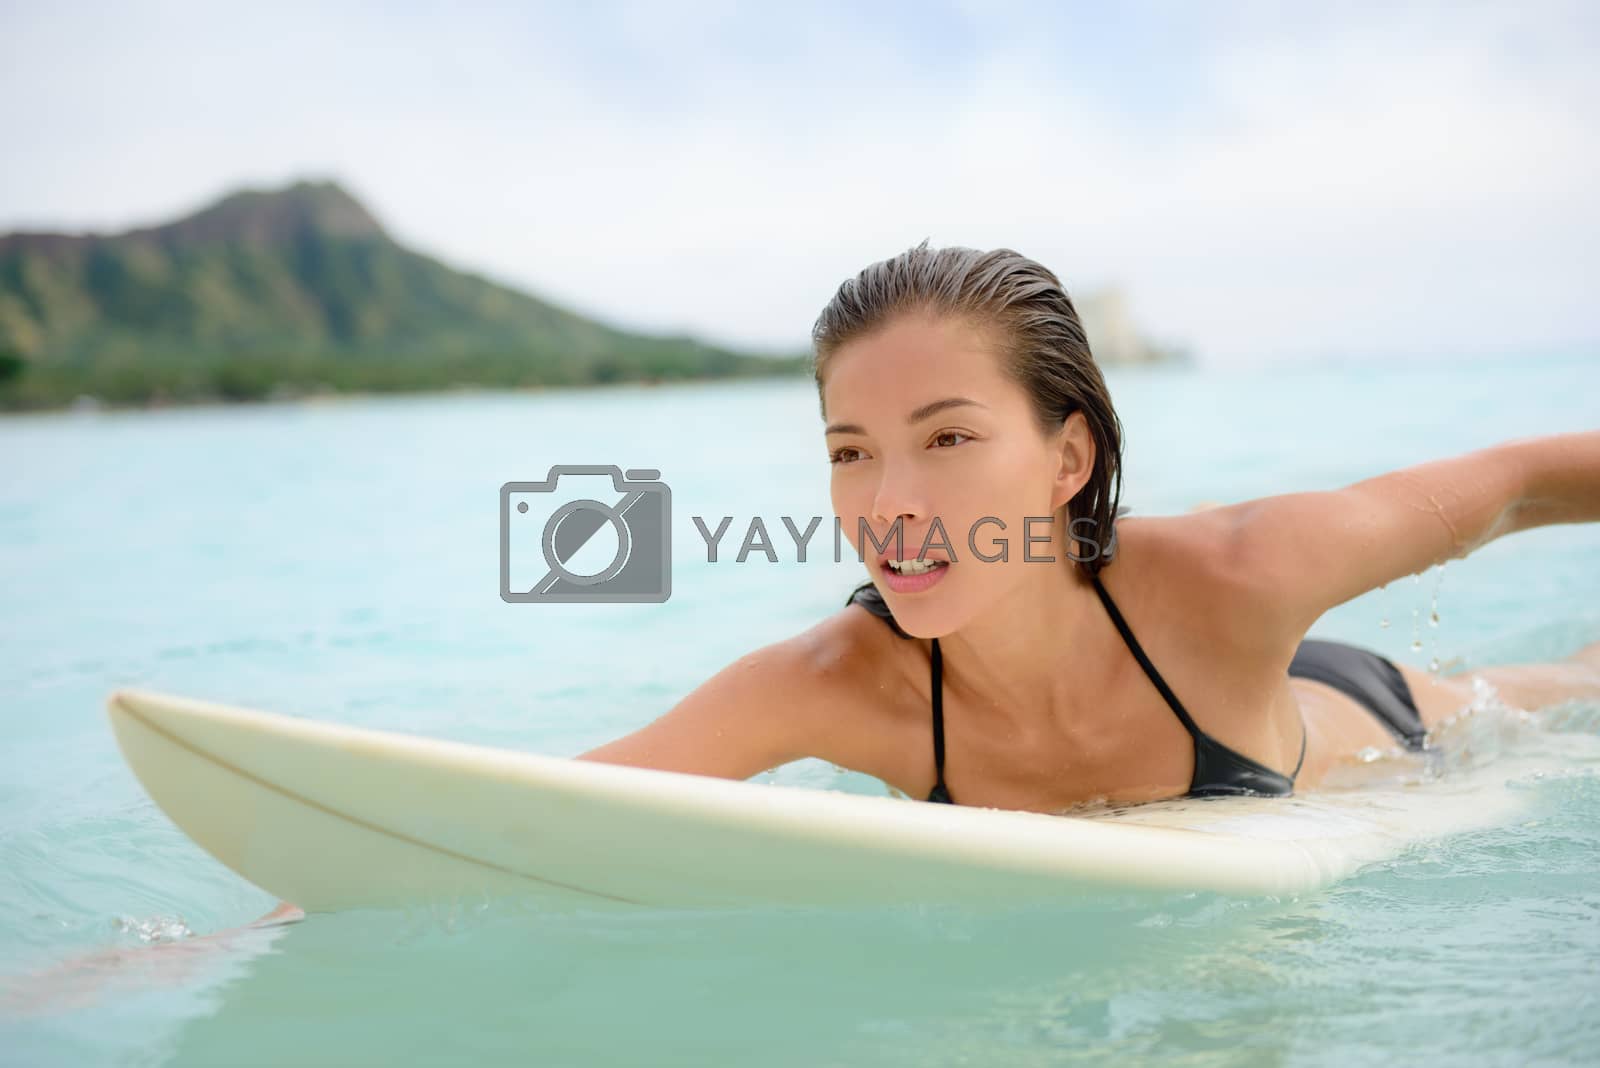 Royalty free image of Surfing surfer girl paddle for surf on surfboard by Maridav